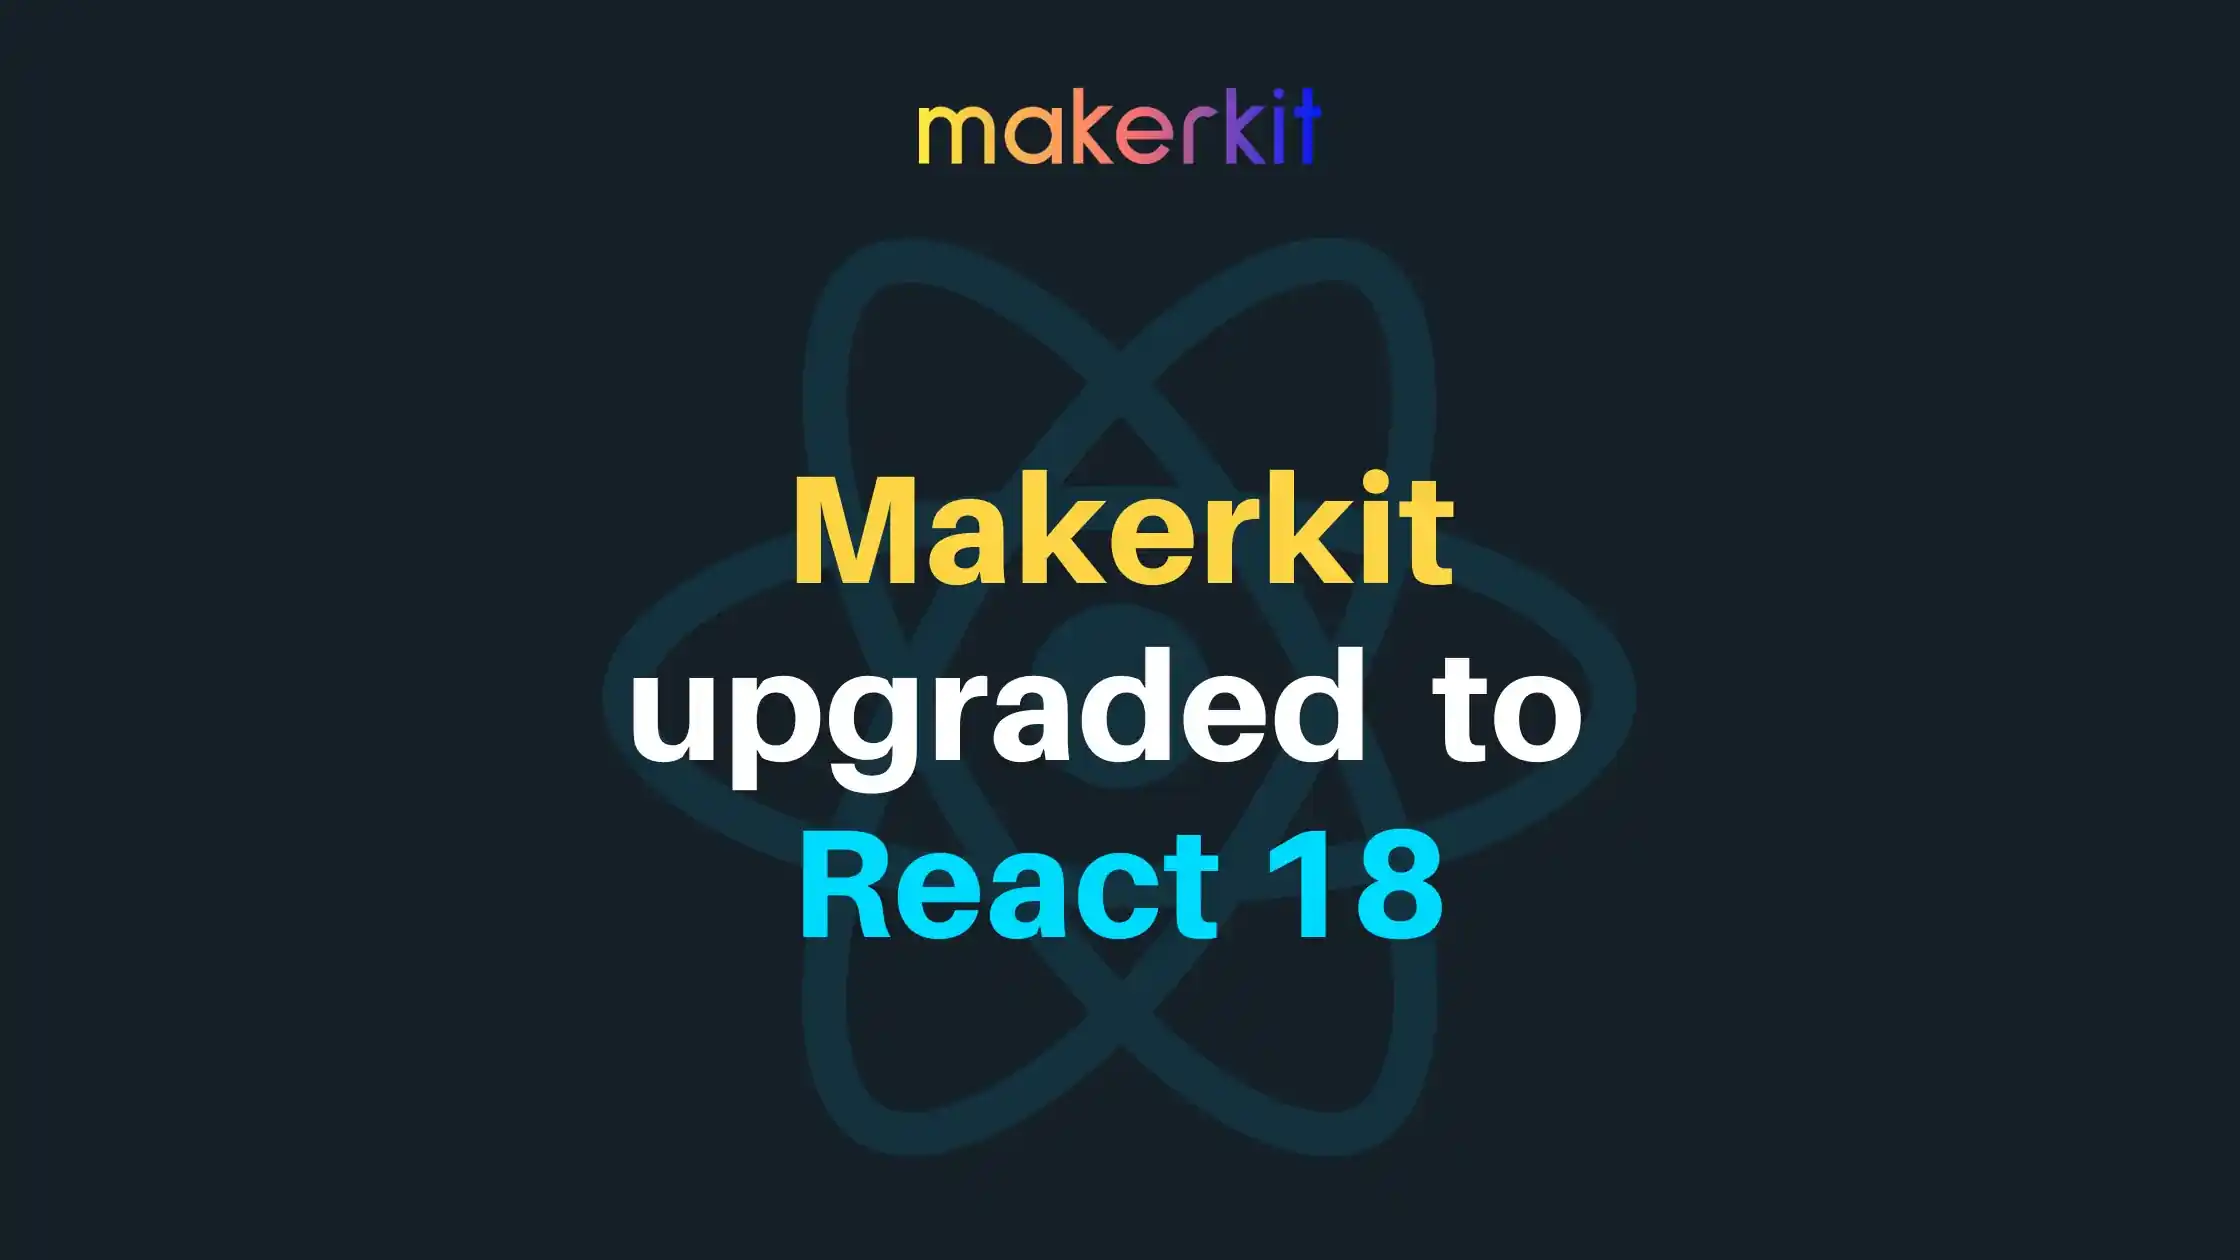 Cover Image for Makerkit upgraded to React 18